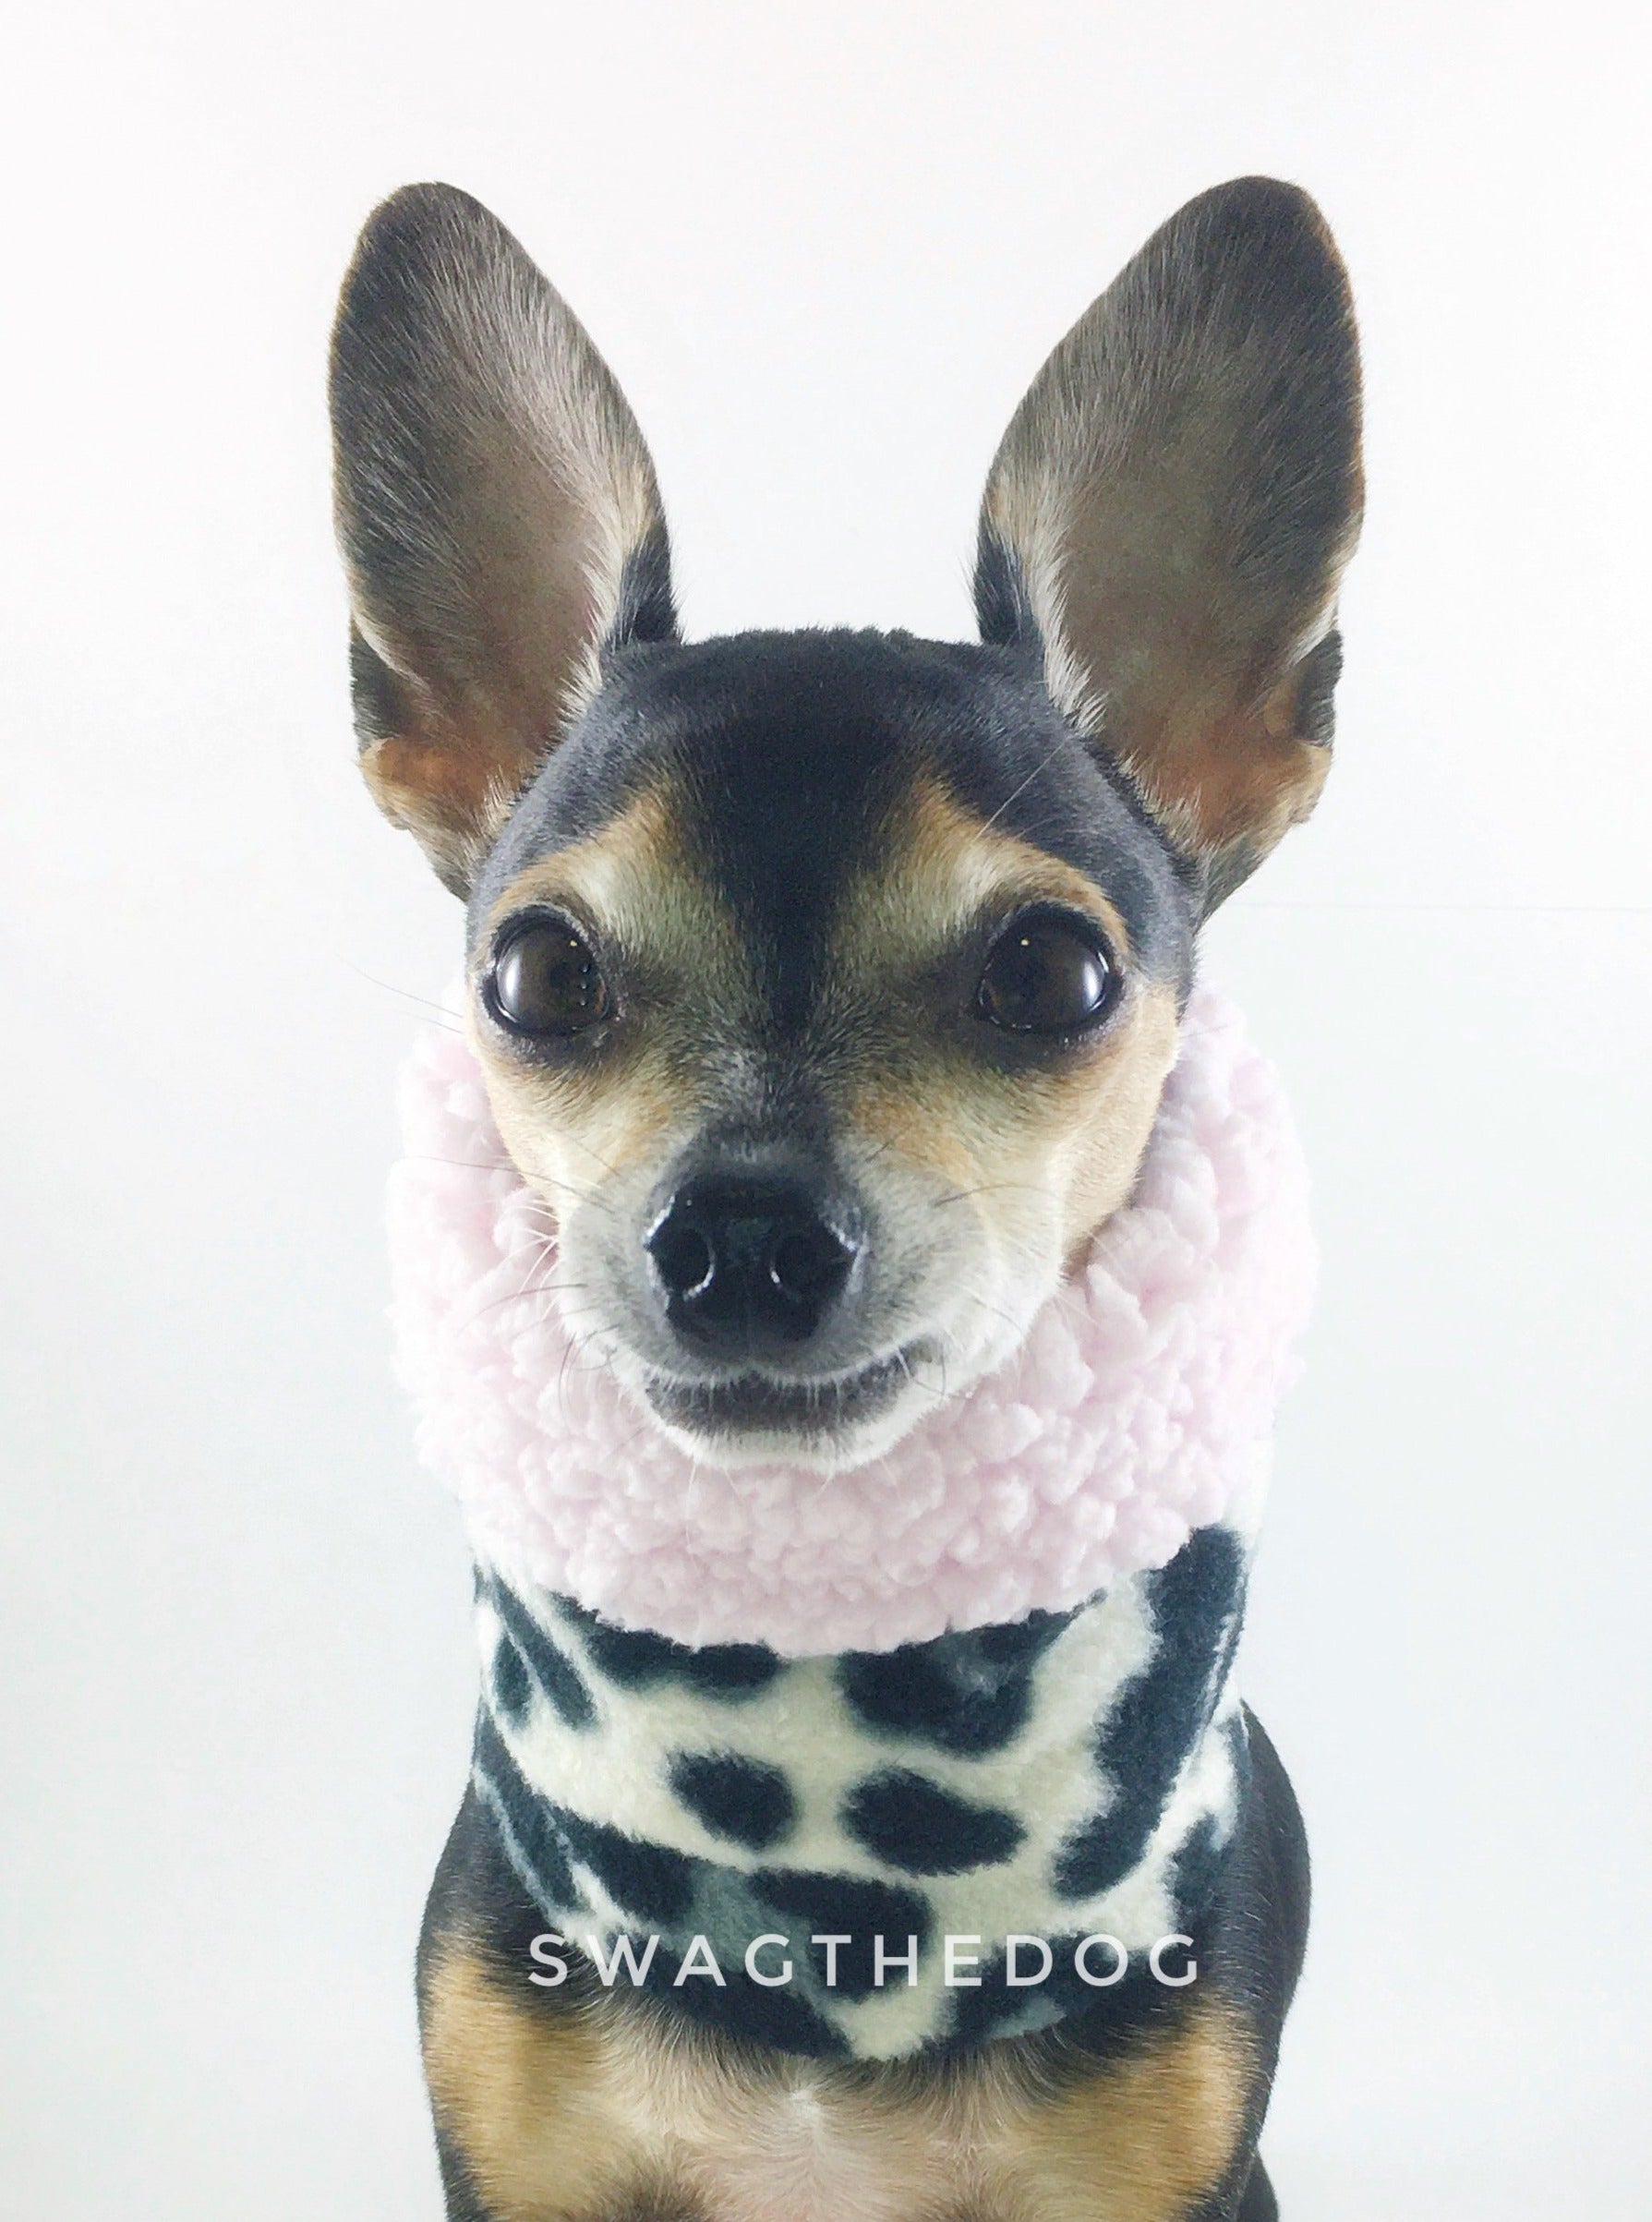 Gray Snow Leopard Swagsnood - Close-up Face View of Hugo, Cute Chihuahua Dog Wearing gray snow leopard print fleece dog snood. Pink sherpa rolled up 1/3 of the snood and 2/3 with gray snow leopard print fleece